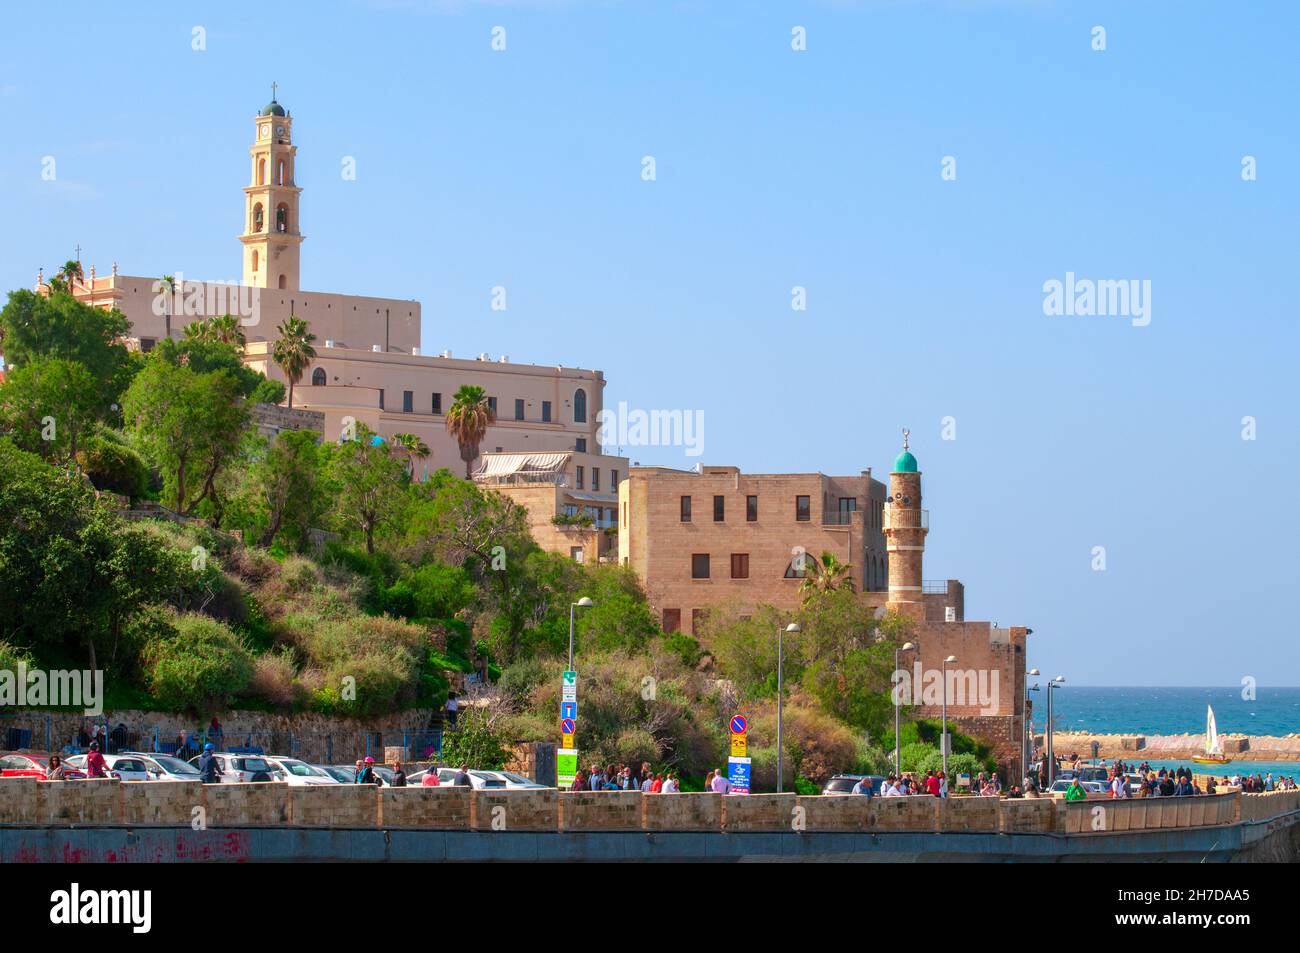 Israel, Old Jaffa as seen from the North.  The entrance to the ancient port on the right and the belfry of the Church and Monastery of St Peter in the Stock Photo